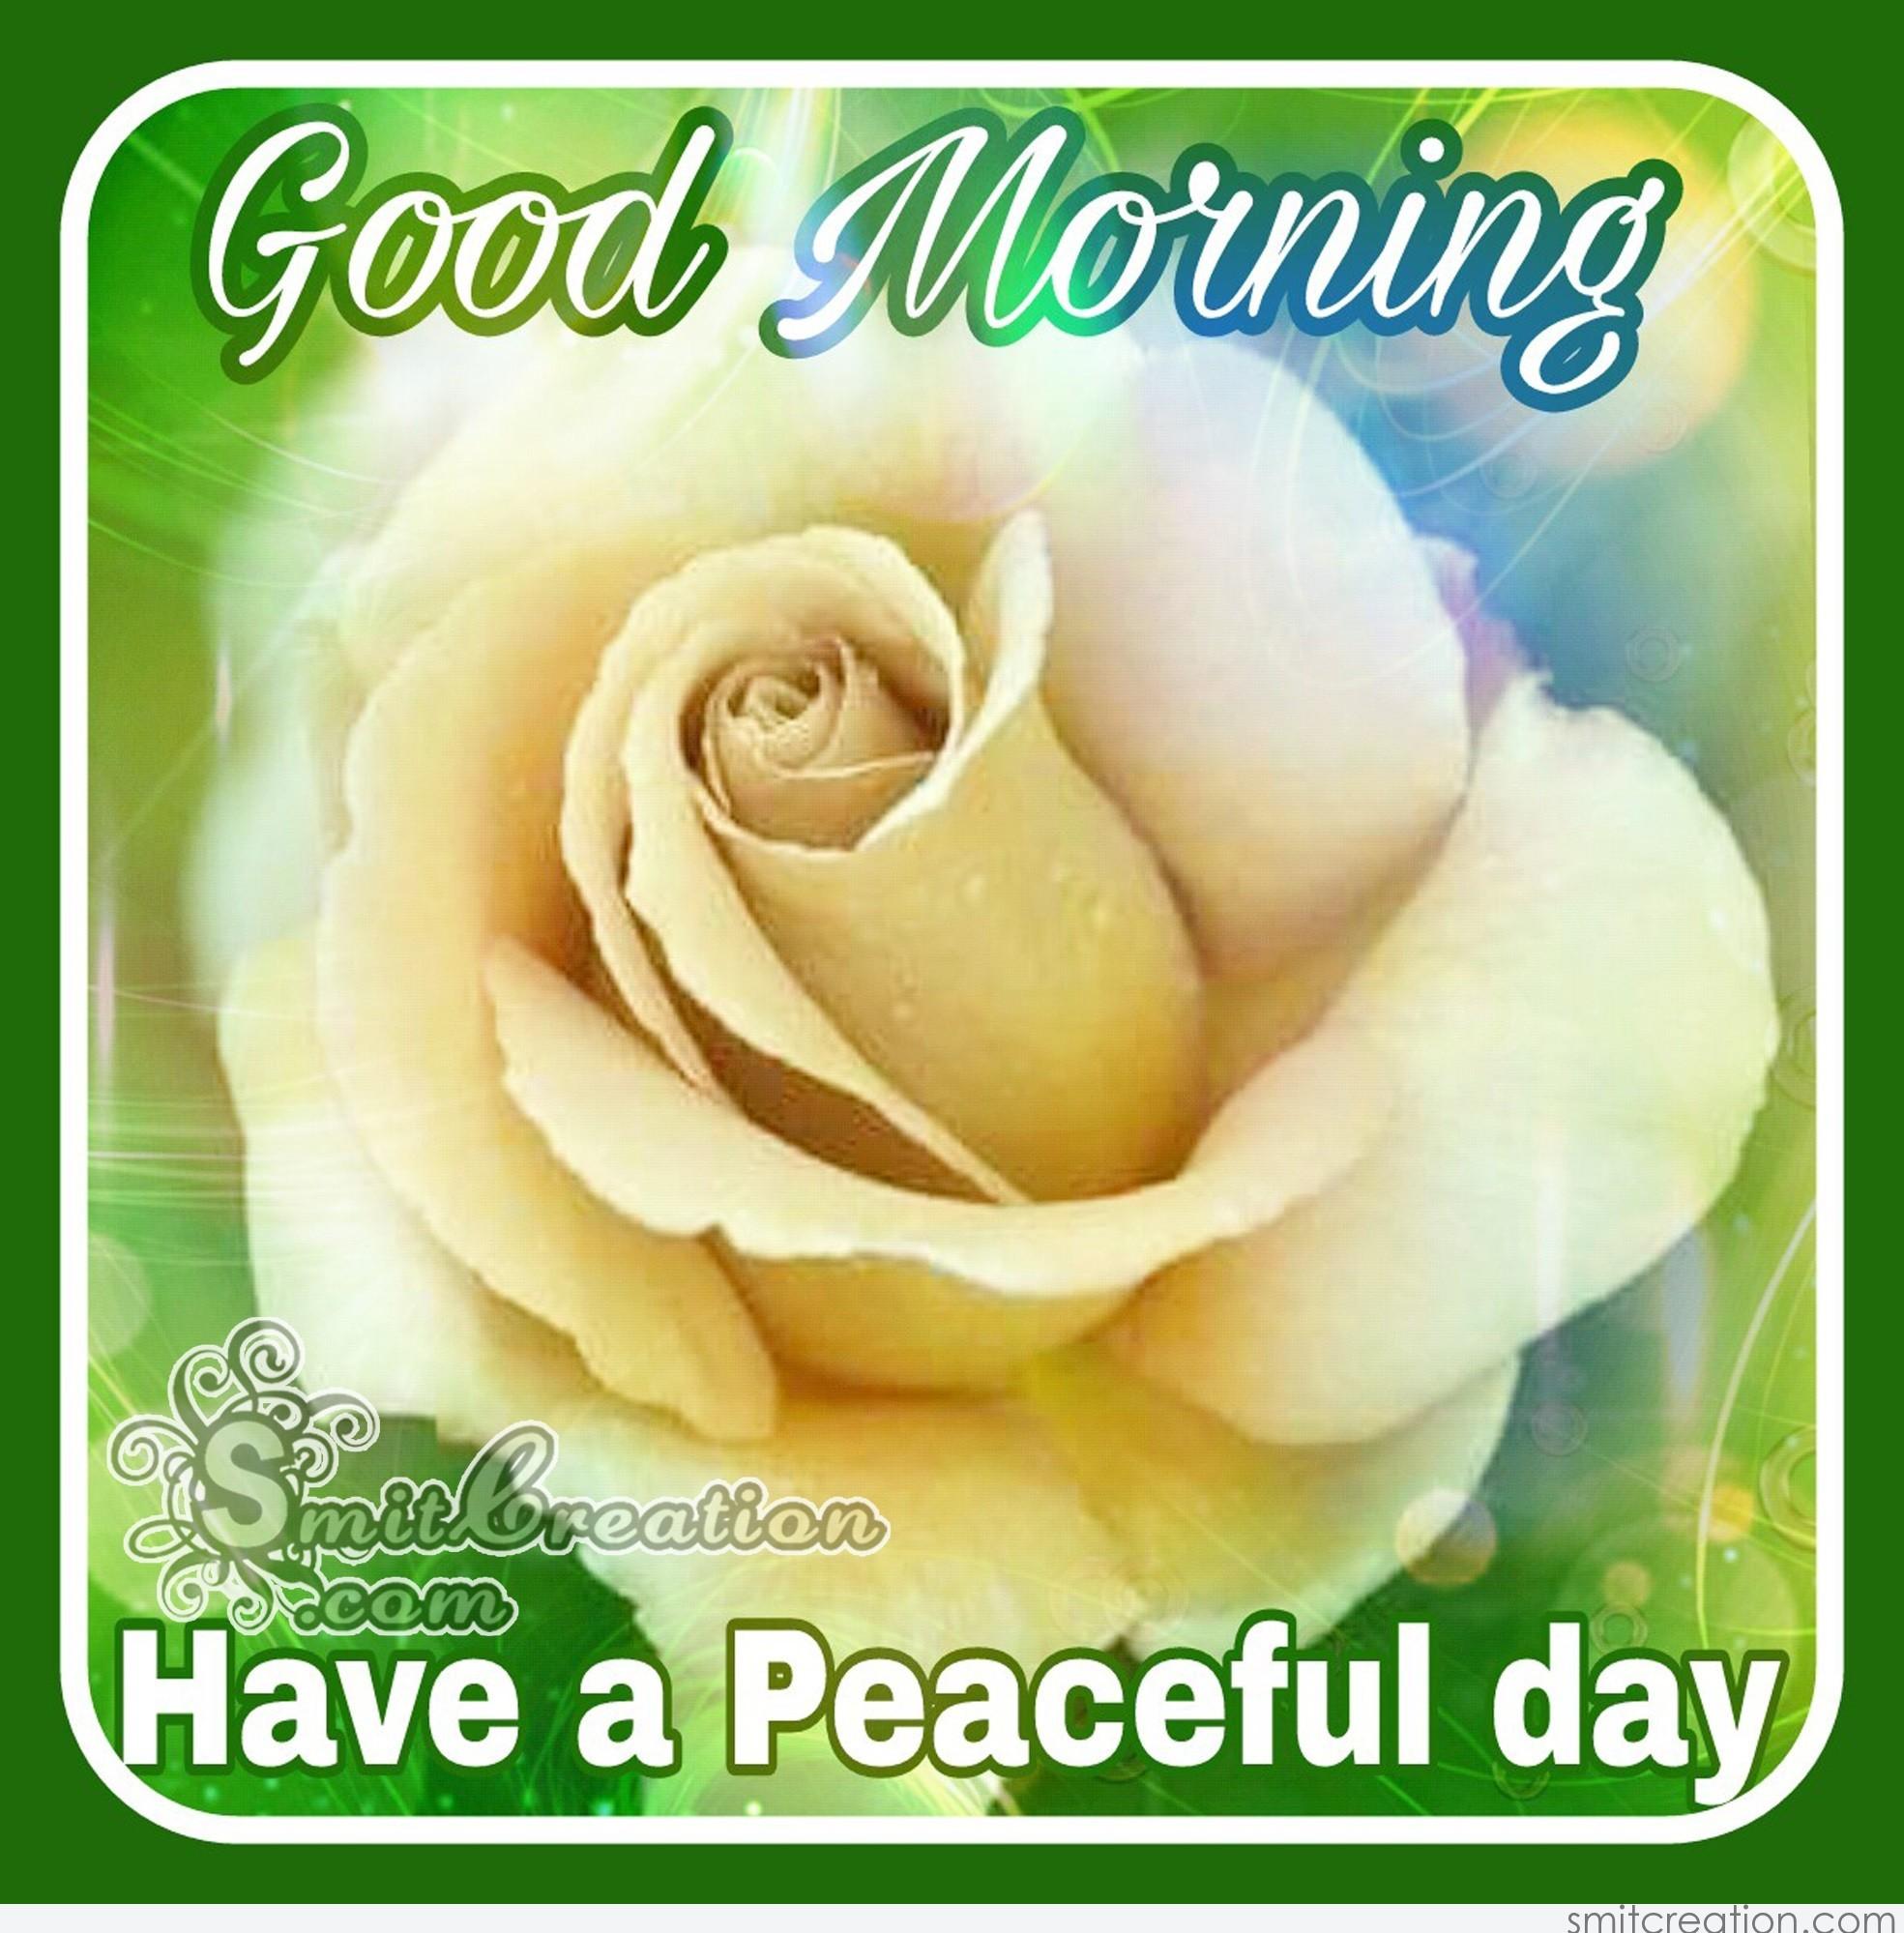 Good Morning Have a Peaceful day - SmitCreation.com